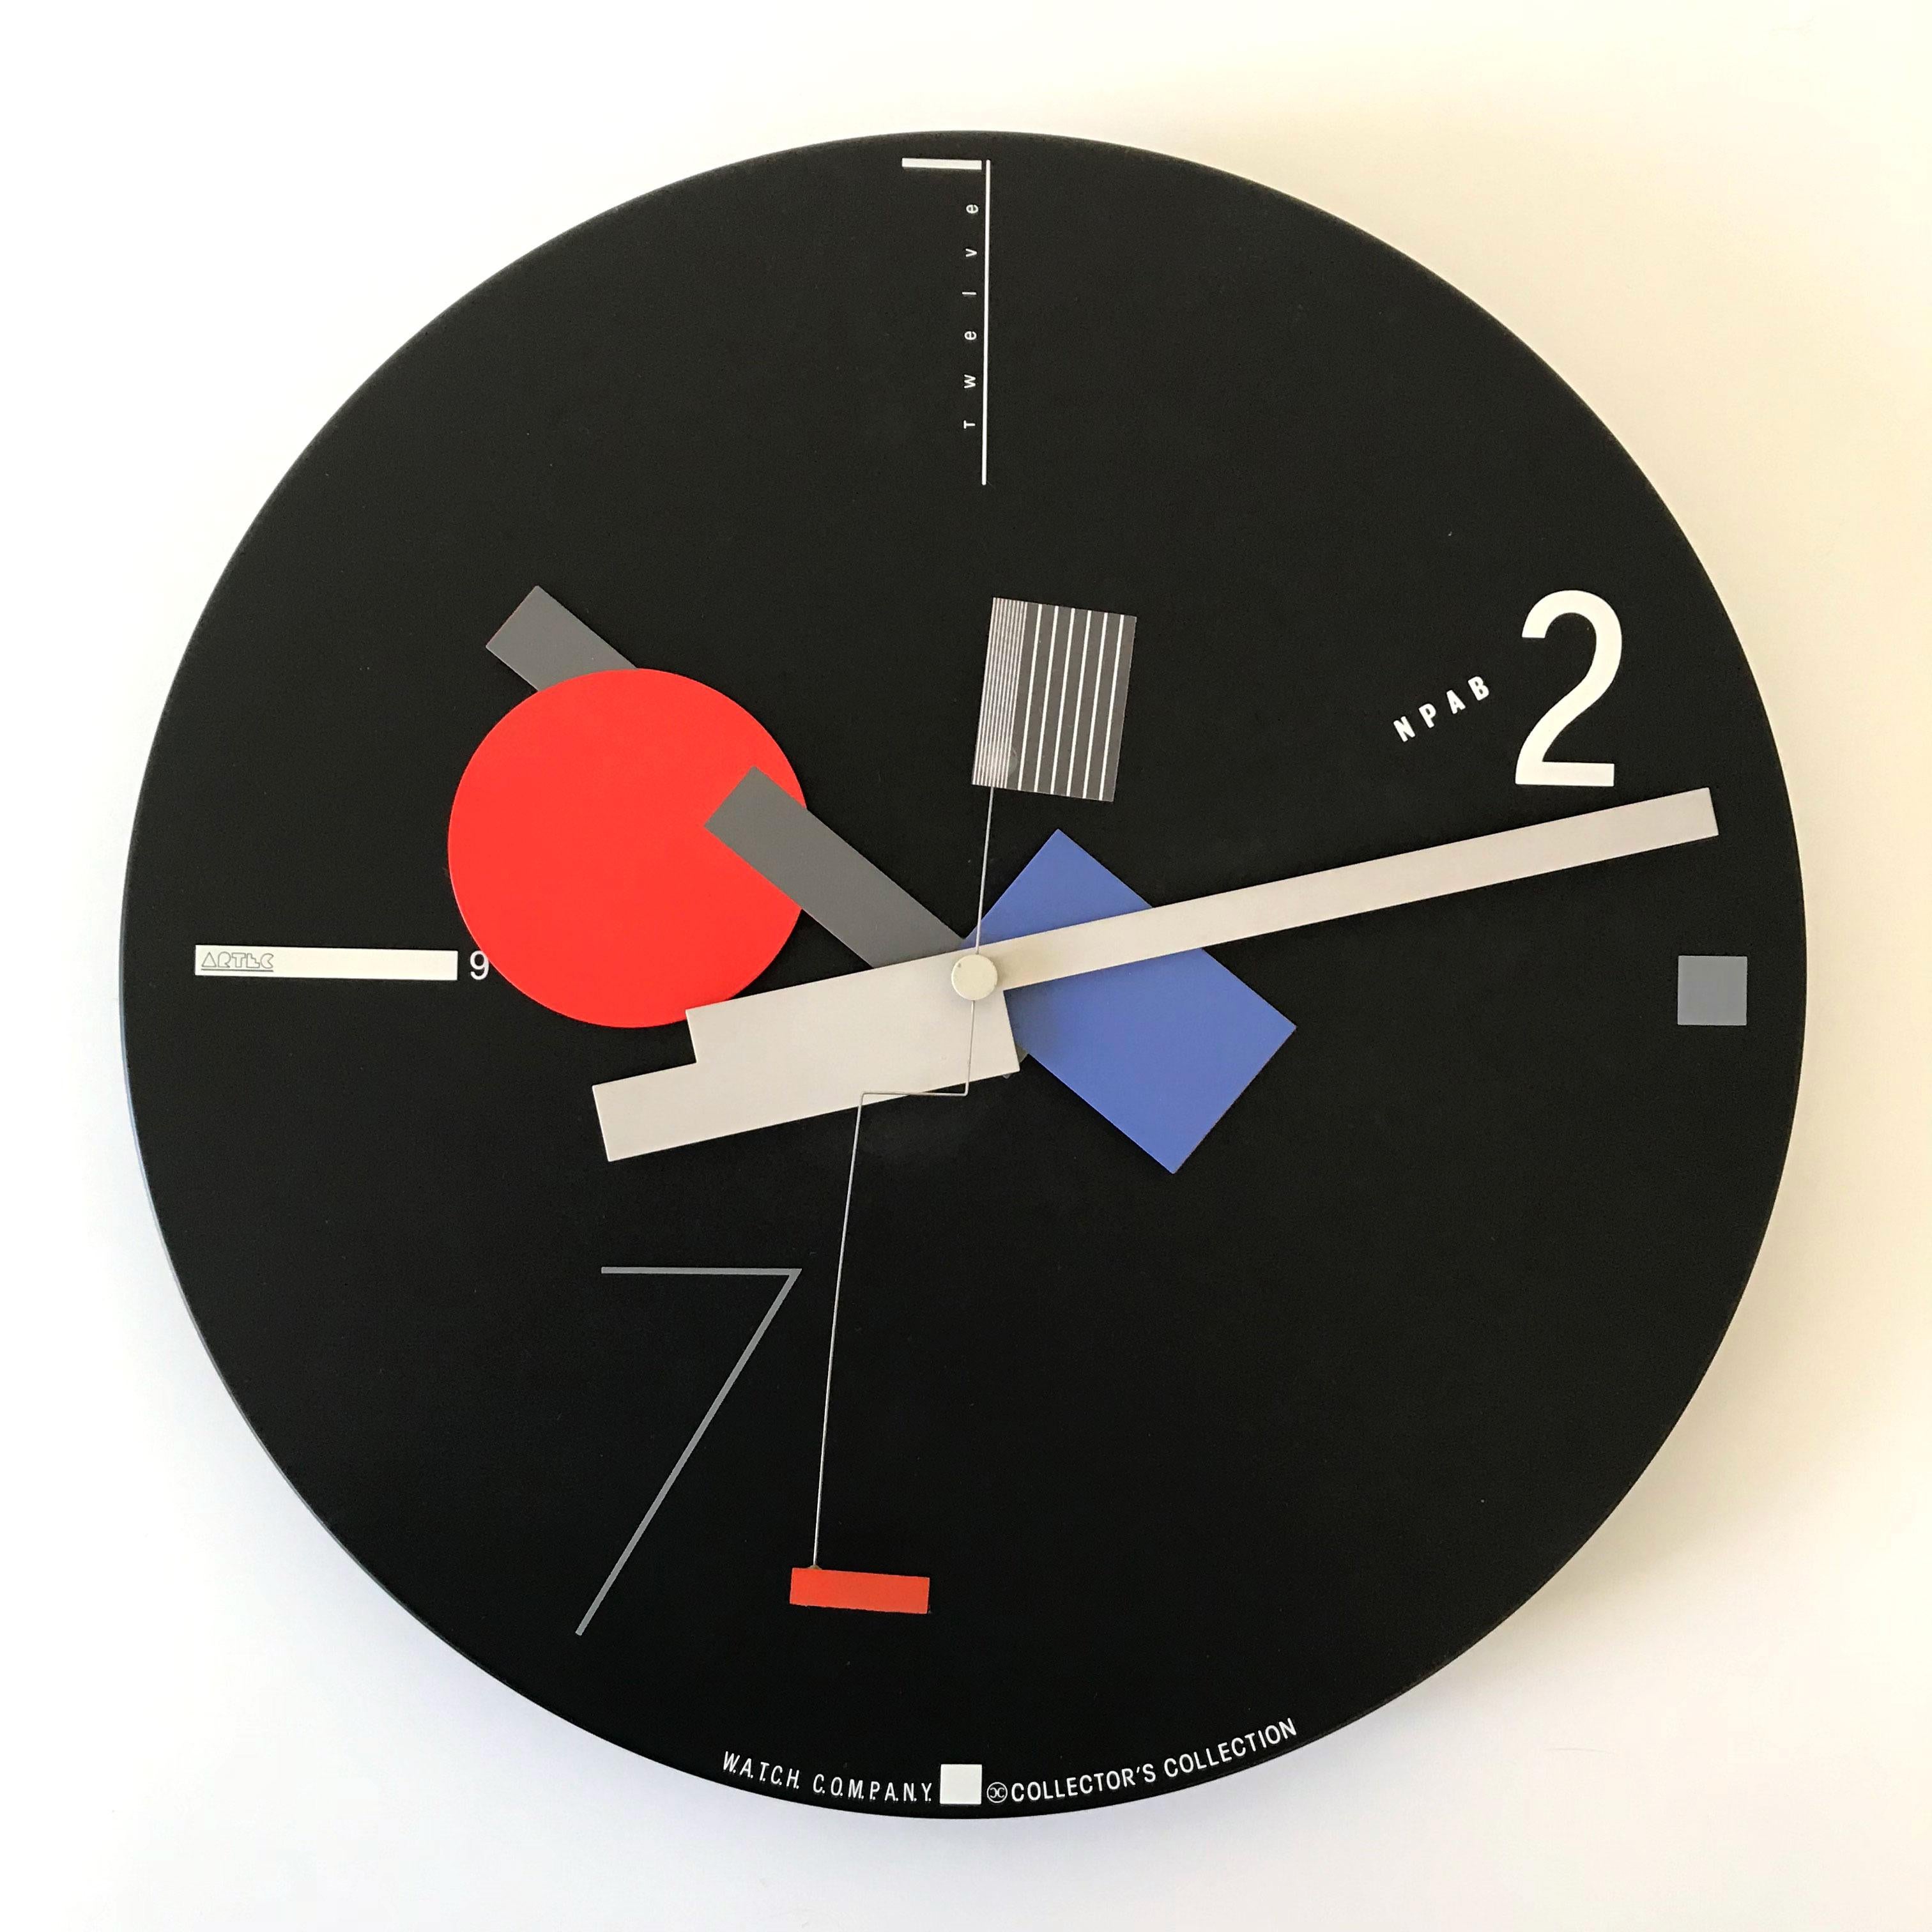 Stunning art time wall clock, 1980s, New York, USA. Designed by Canetti Design Group in Russian Constructivist or German Bauhaus style. This is not a hard to find clock only, but a highly decorative art object which you will enjoy at every look. It